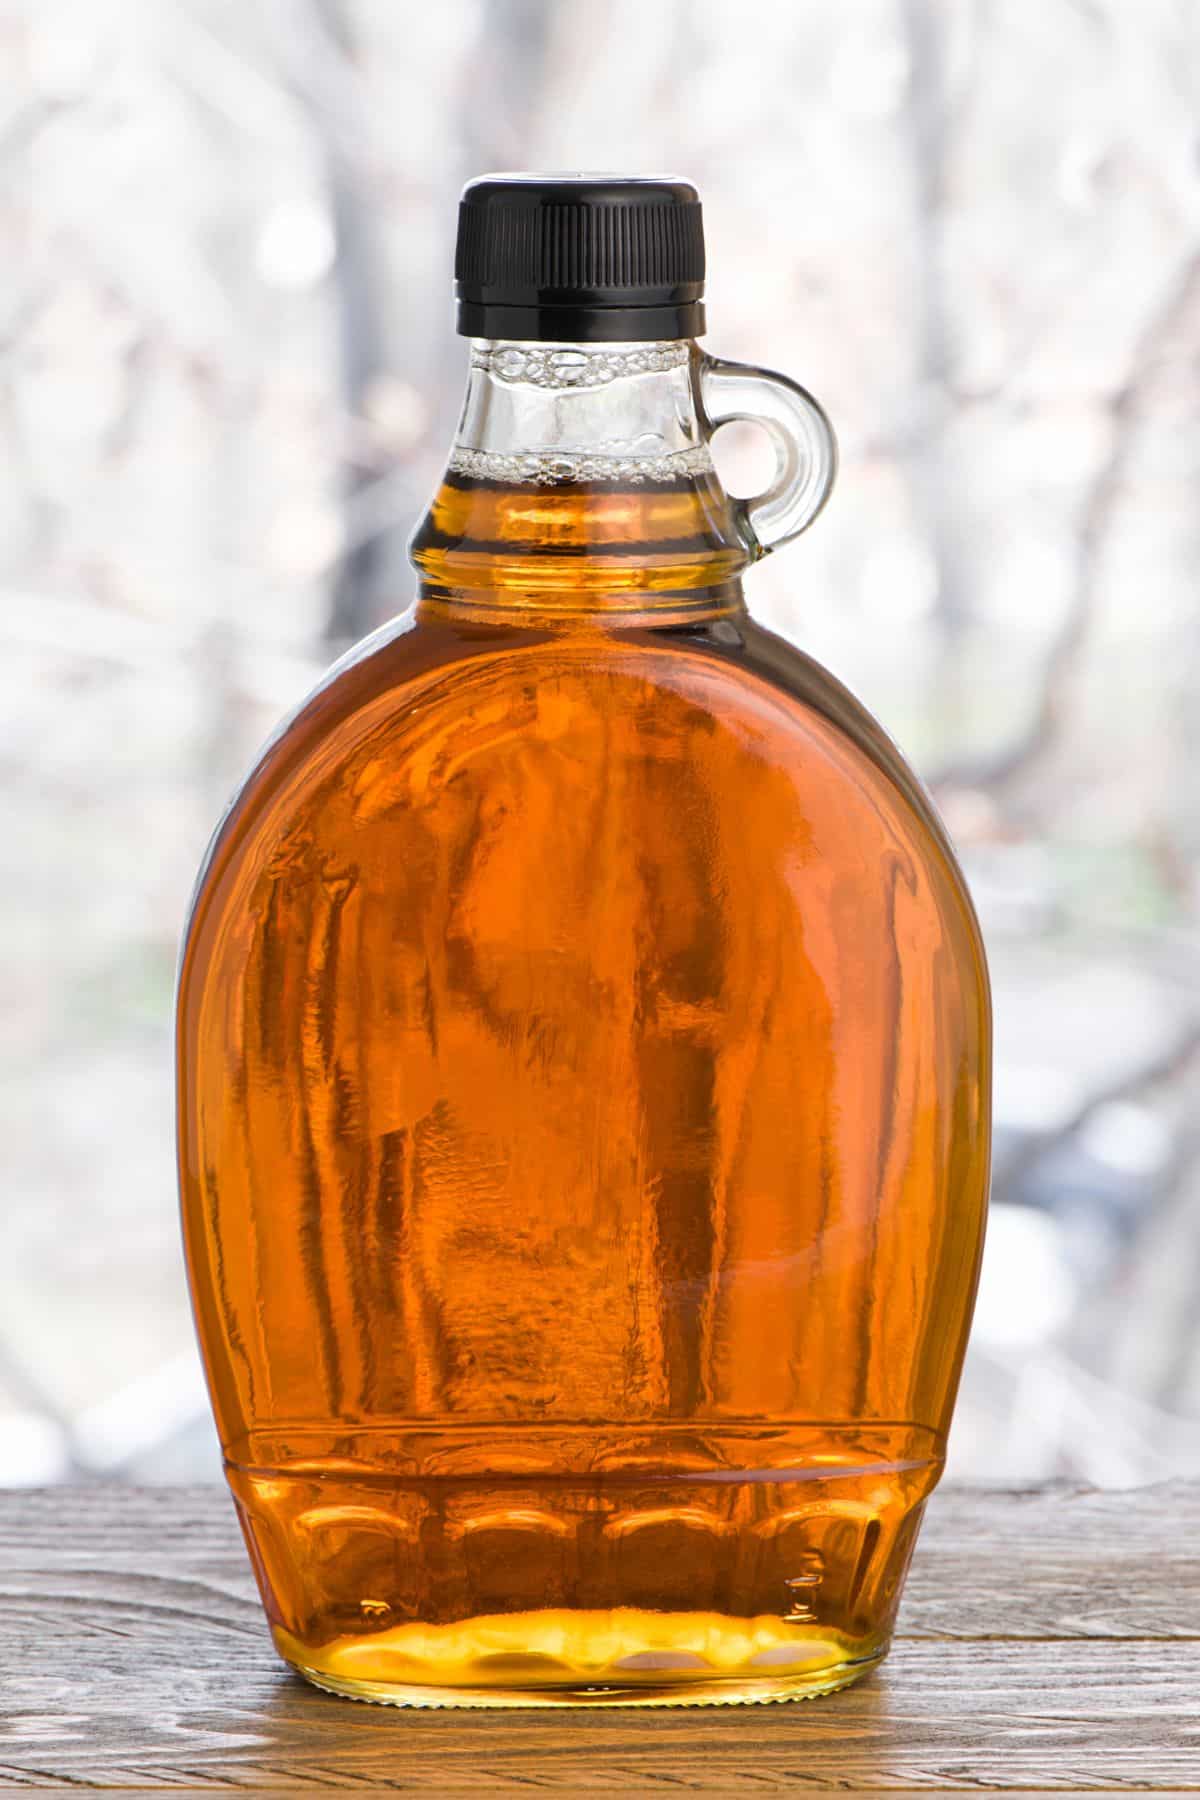 Bottle of maple syrup on wooden surface.